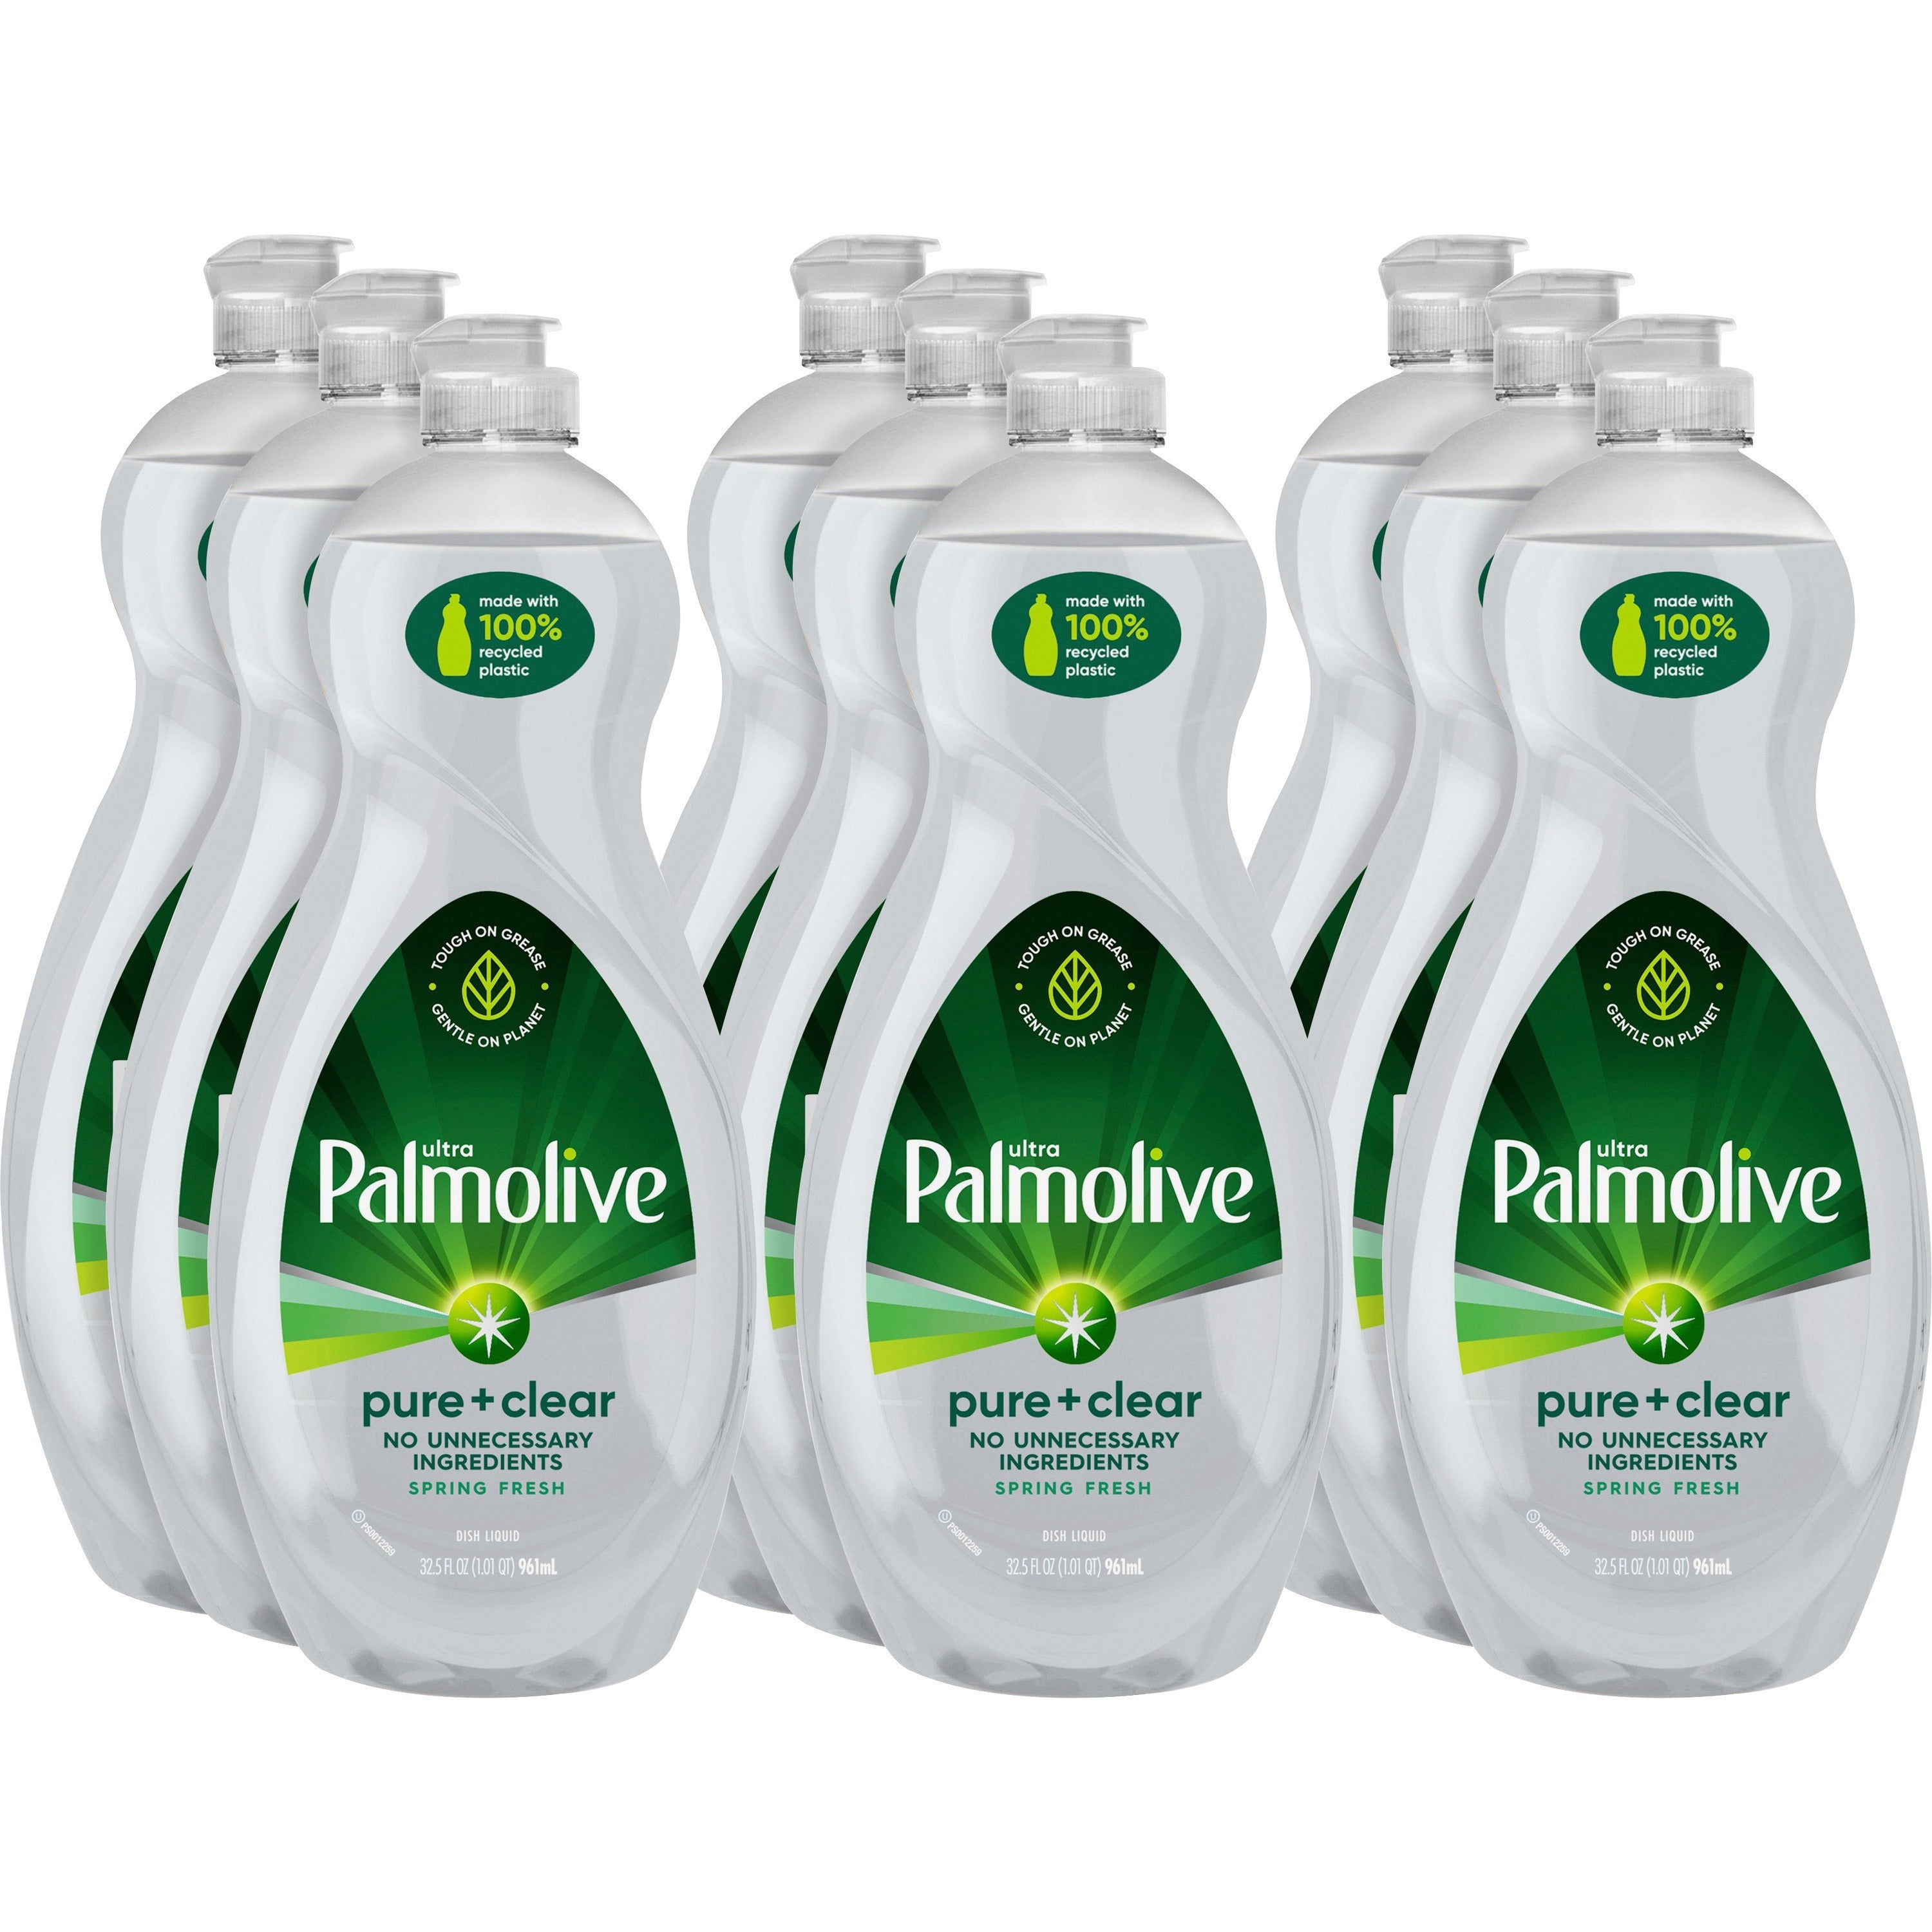 Palmolive Pure/Clear Ultra Dish Soap - 32.5 fl oz (1 quart) - 9 / Carton - Hypoallergenic, Fragrance-free, Dye-free, Phosphate-free, Paraben-free, Biodegradable, Eco-friendly - Clear - 1